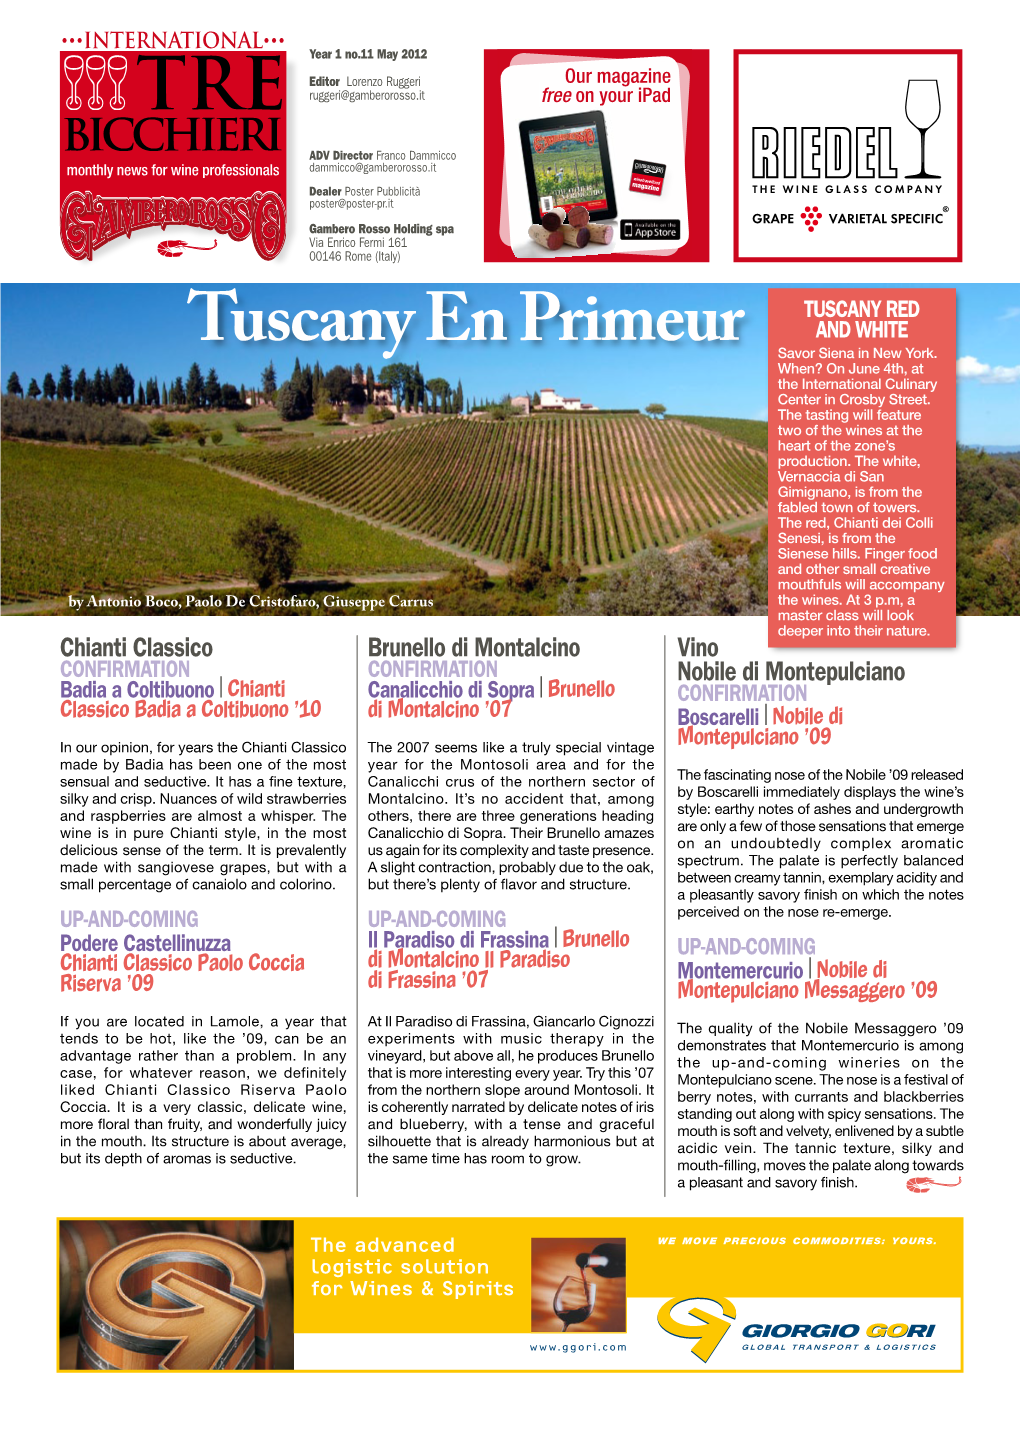 Tuscany En Primeur When? on June 4Th, at the International Culinary Center in Crosby Street